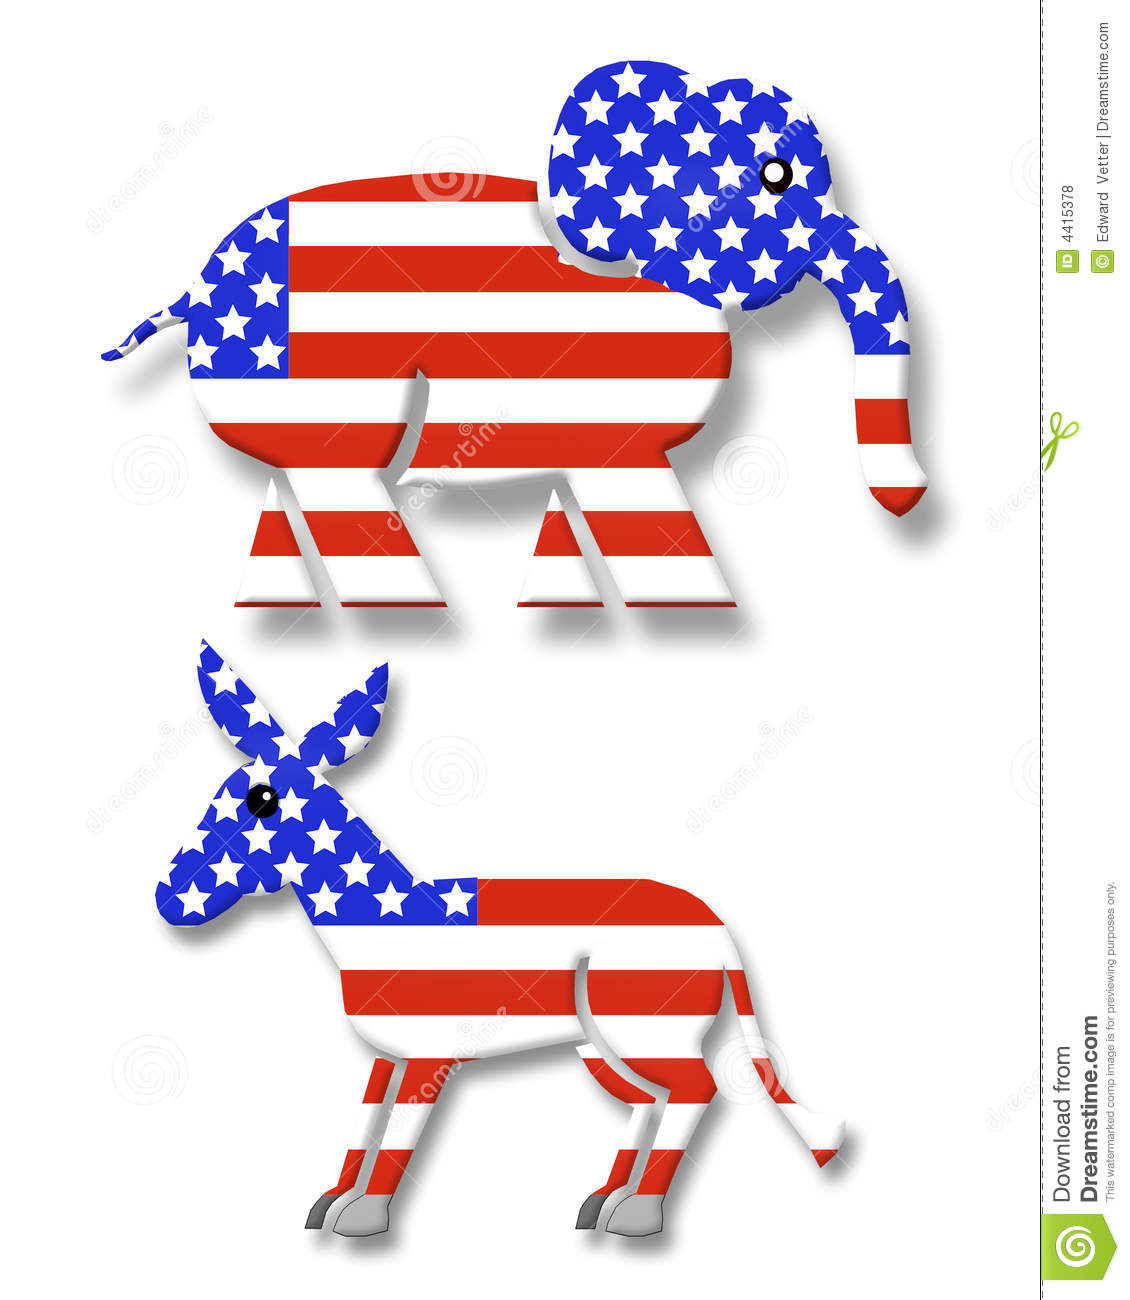 Political Party Symbols 3d Editorial Stock Photo   Image  4415378